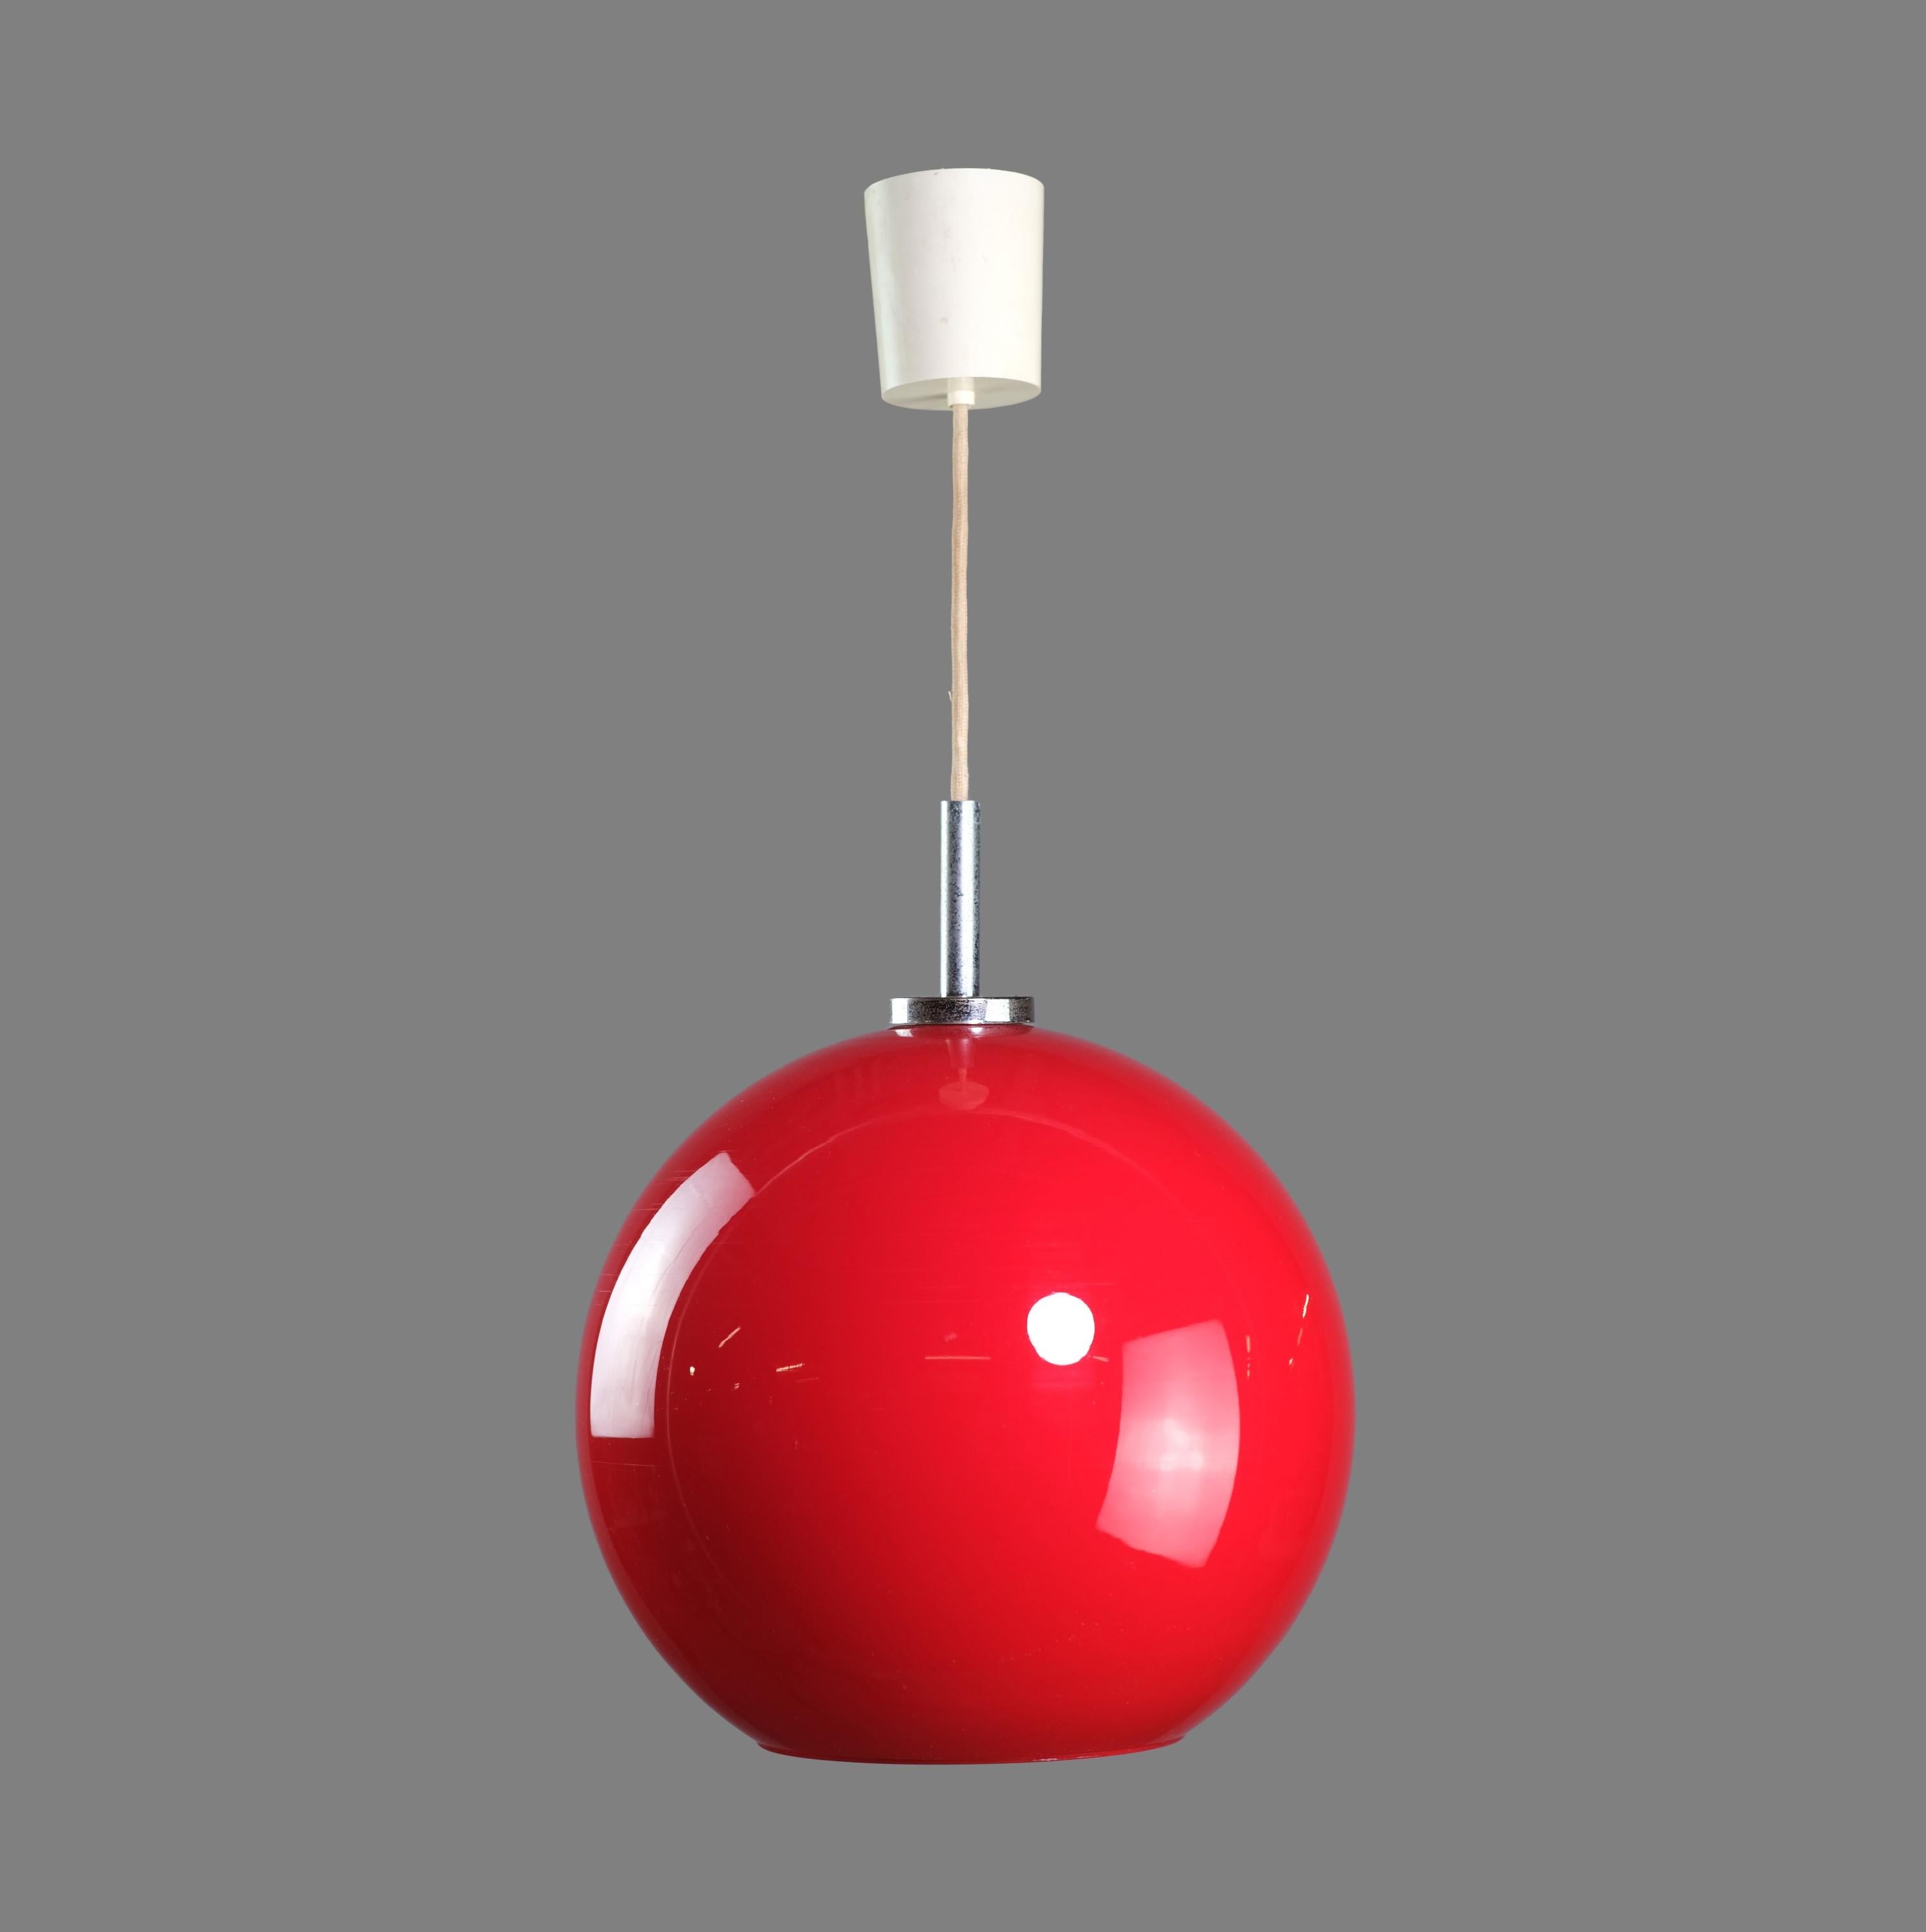 Mid-20th century pendant light from Europe. Features a red opaline sphere shade, fabric covered cable and white plastic ceiling canopy. This can be seen at our 400 Gilligan St location in Scranton, PA.